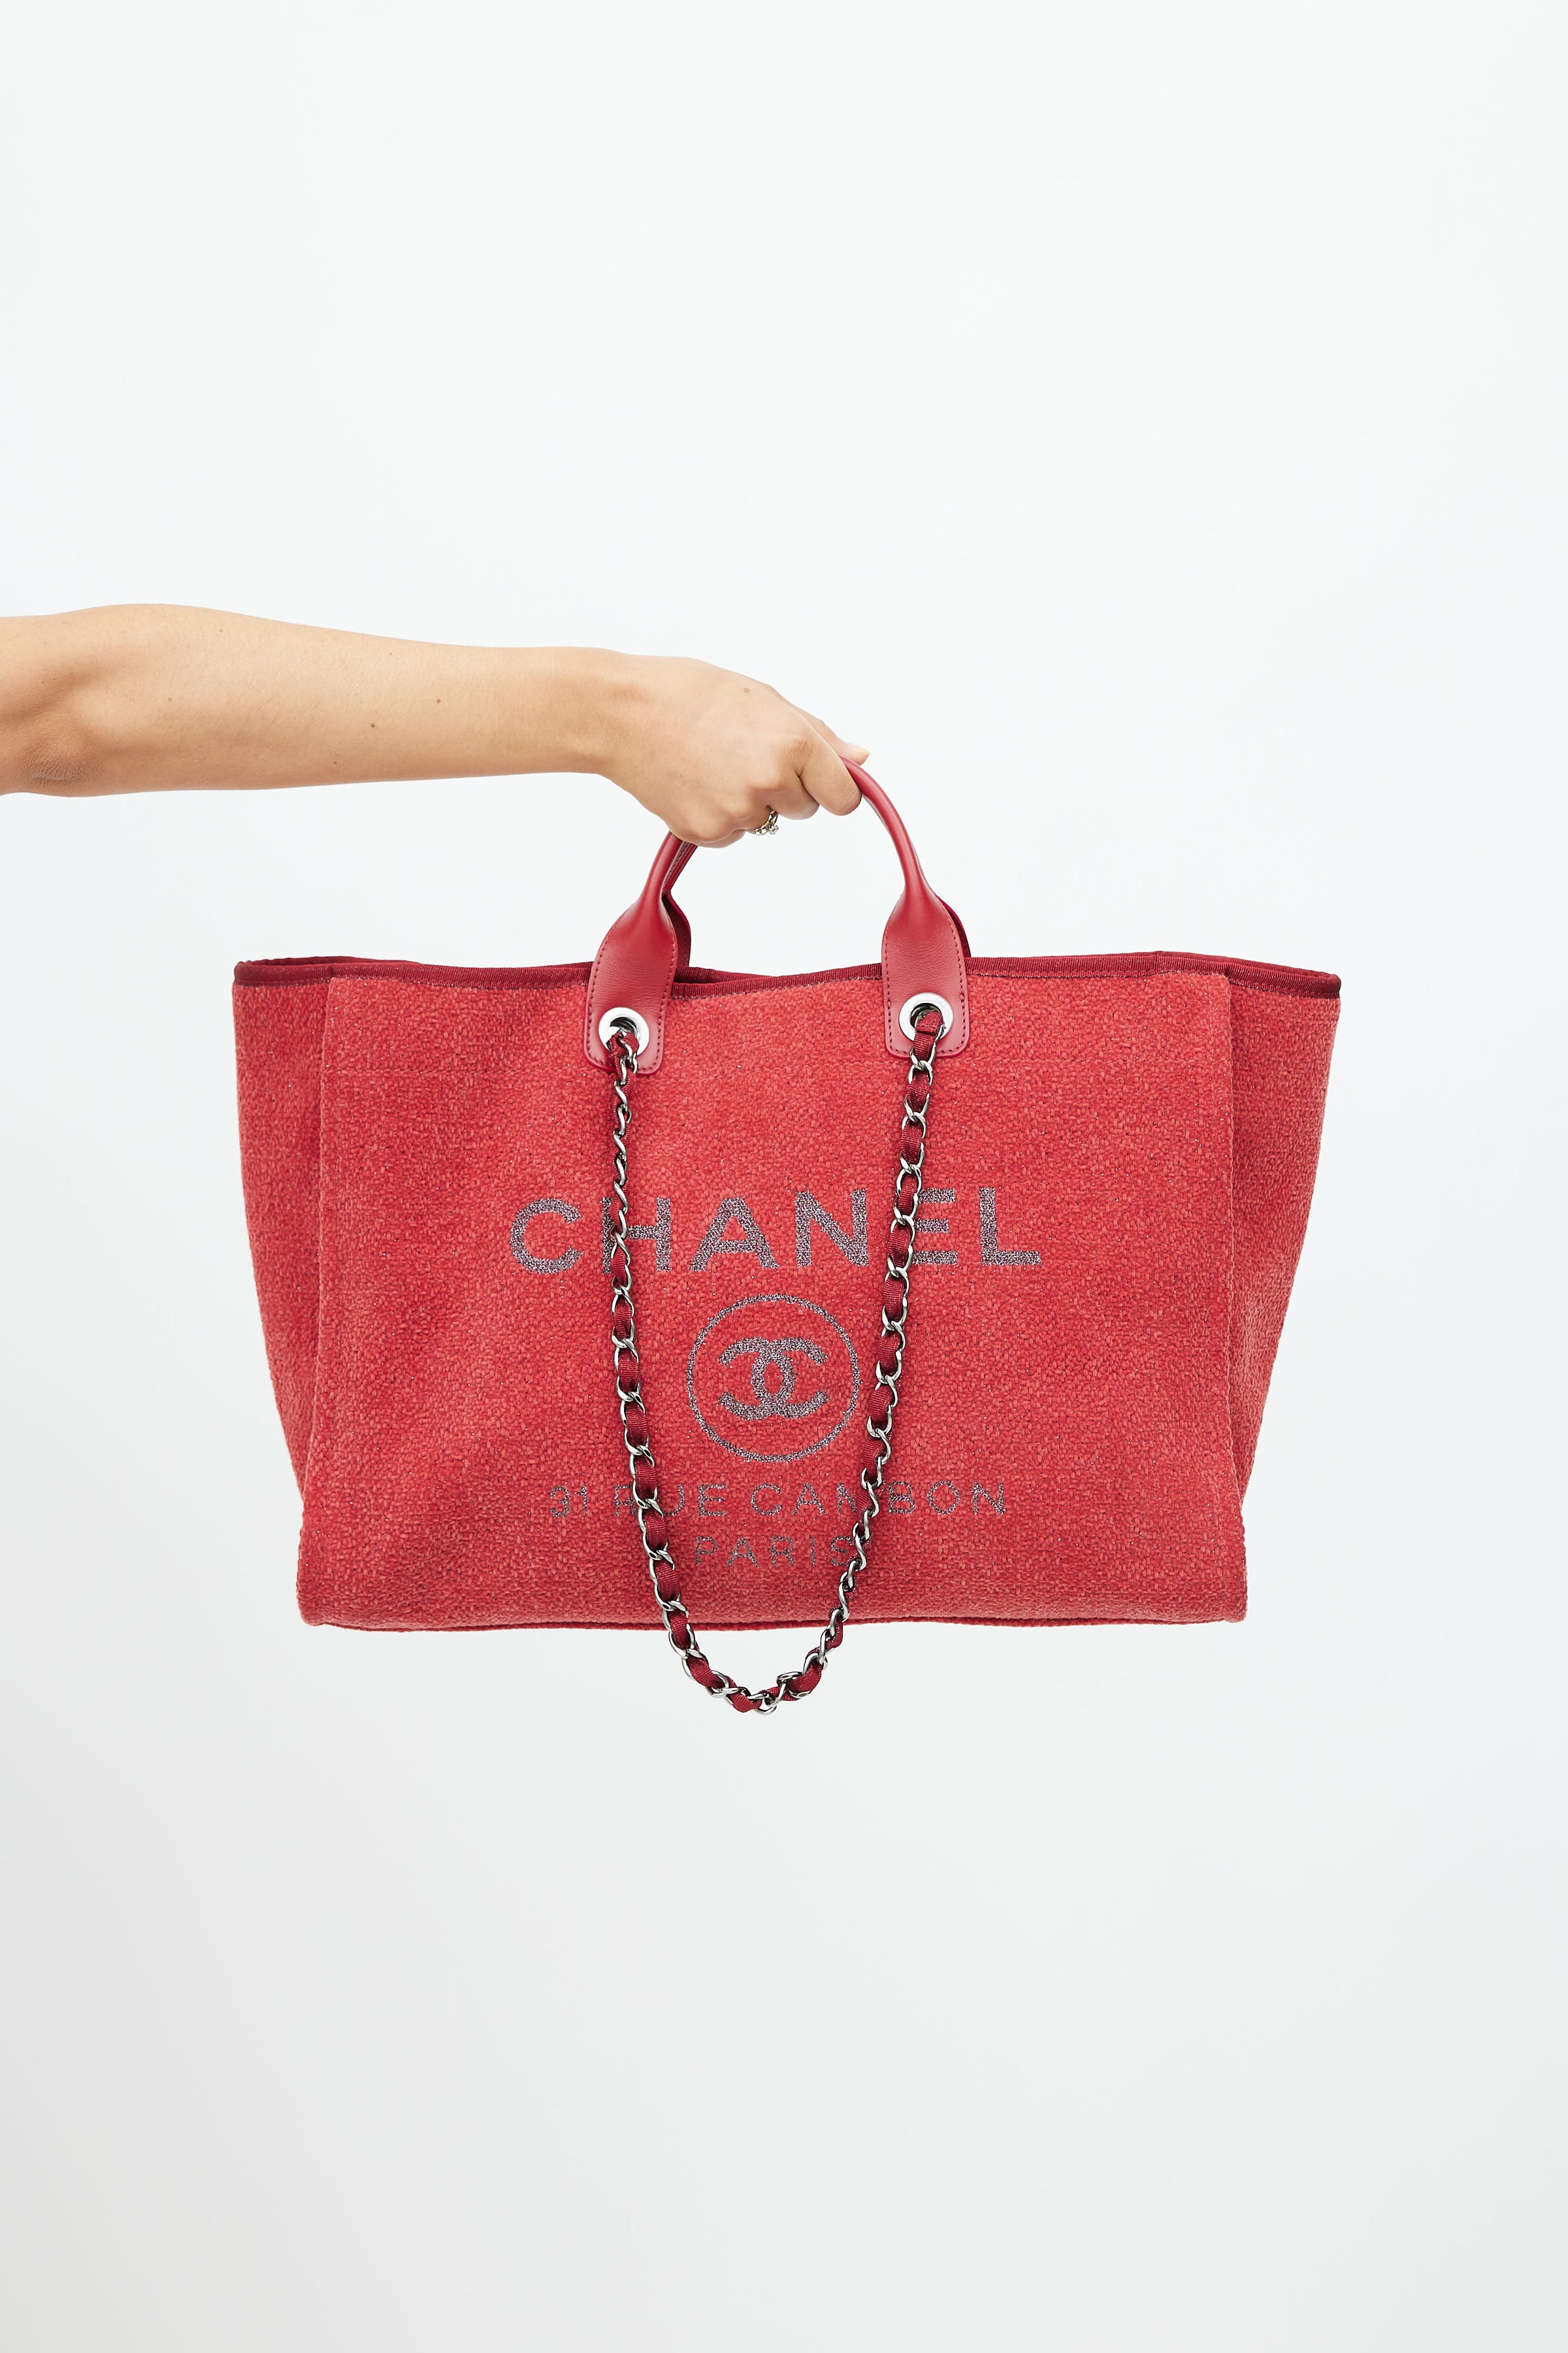 CHANEL 2019 DEAUVILLE LARGE WOOL FELT TOTE BAG